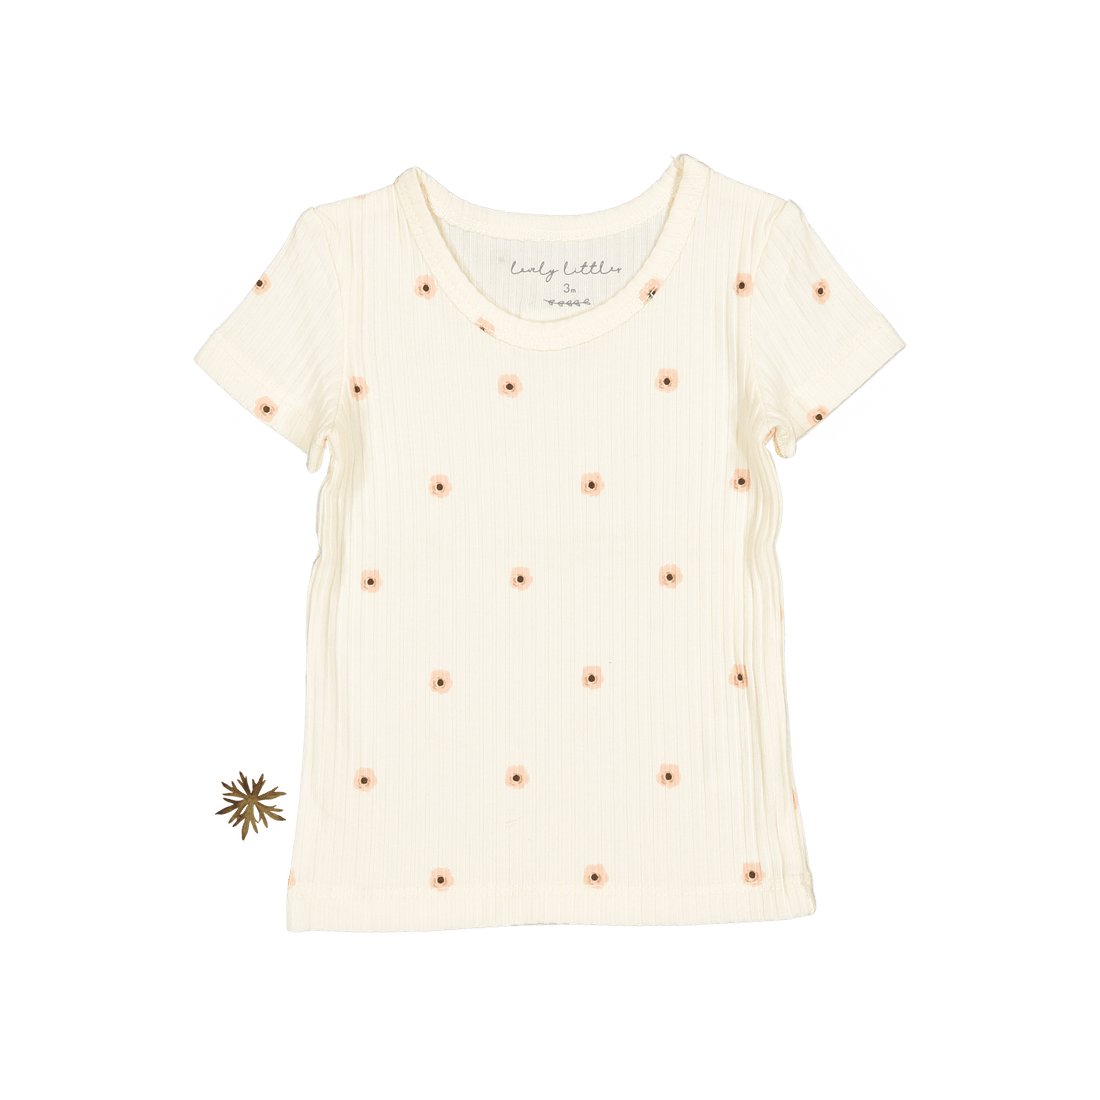 The Printed Short Sleeve Tee - Butter Flower